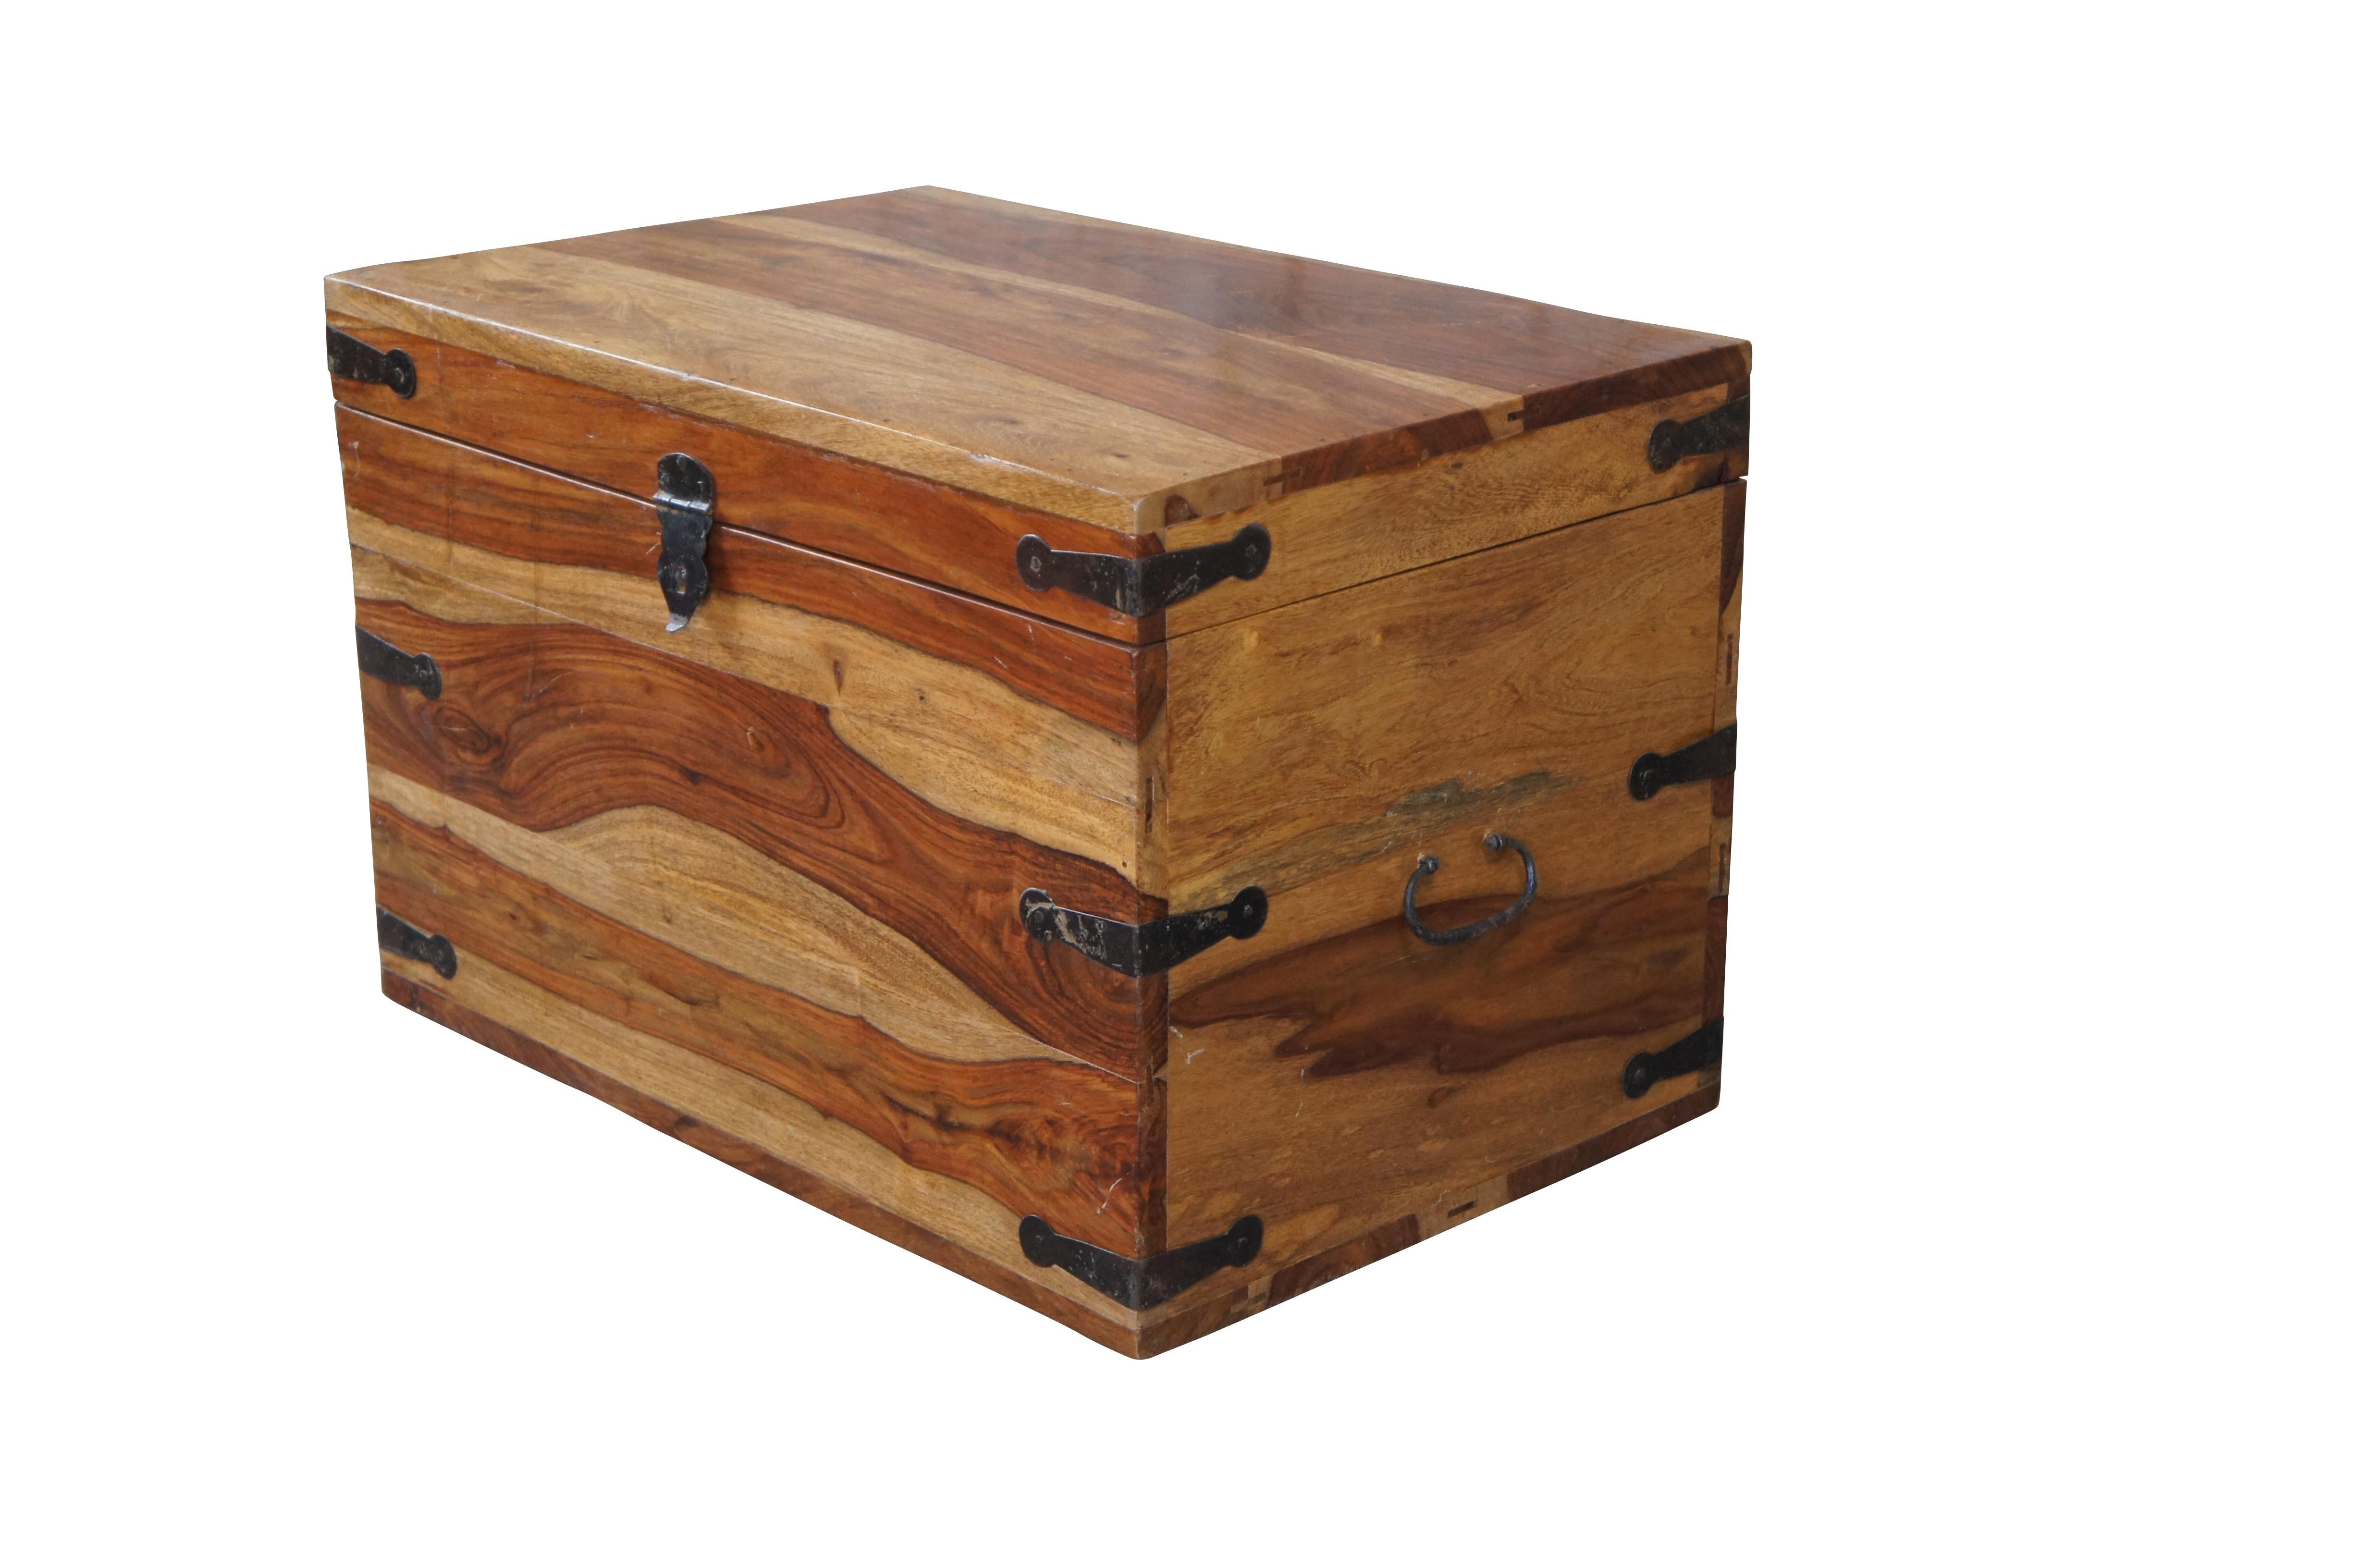 Late 20th century British Colonial style Sheesham wood blanket storage chest or coffee table. Features a beautiful two tone finish with iron hardware.

Dimensions:
16